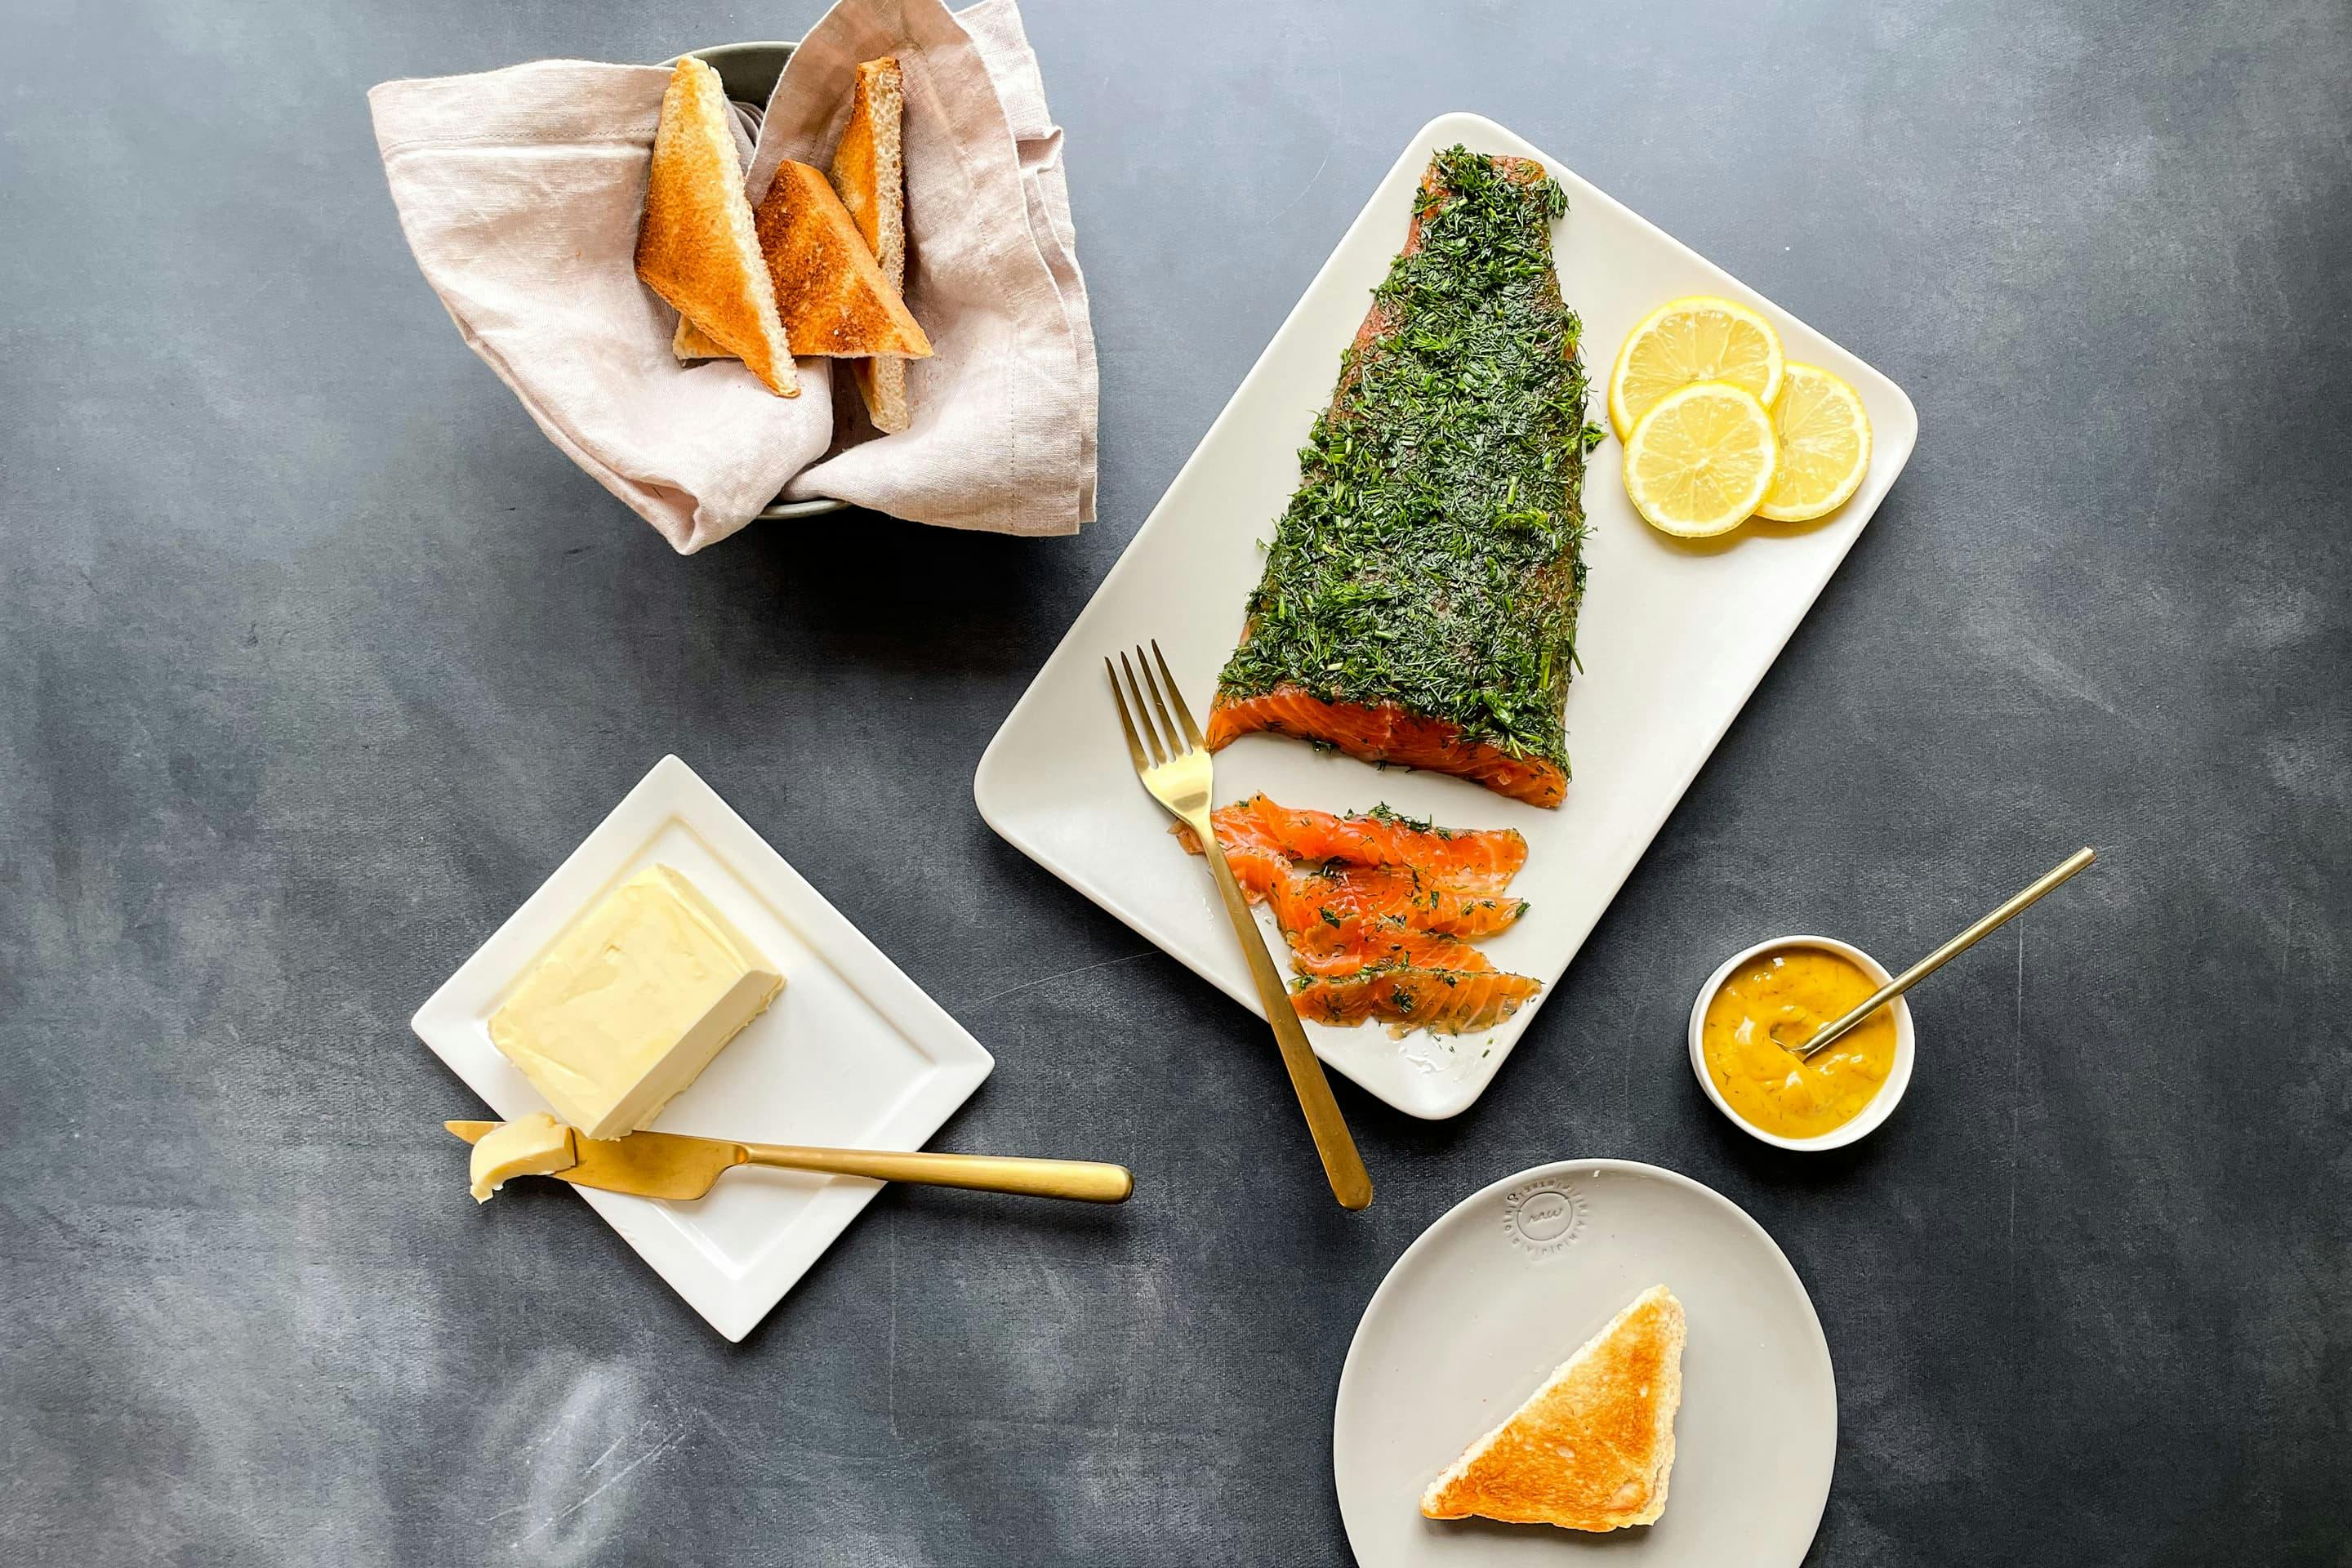 Gin-marinated salmon with an herb crust and toast.